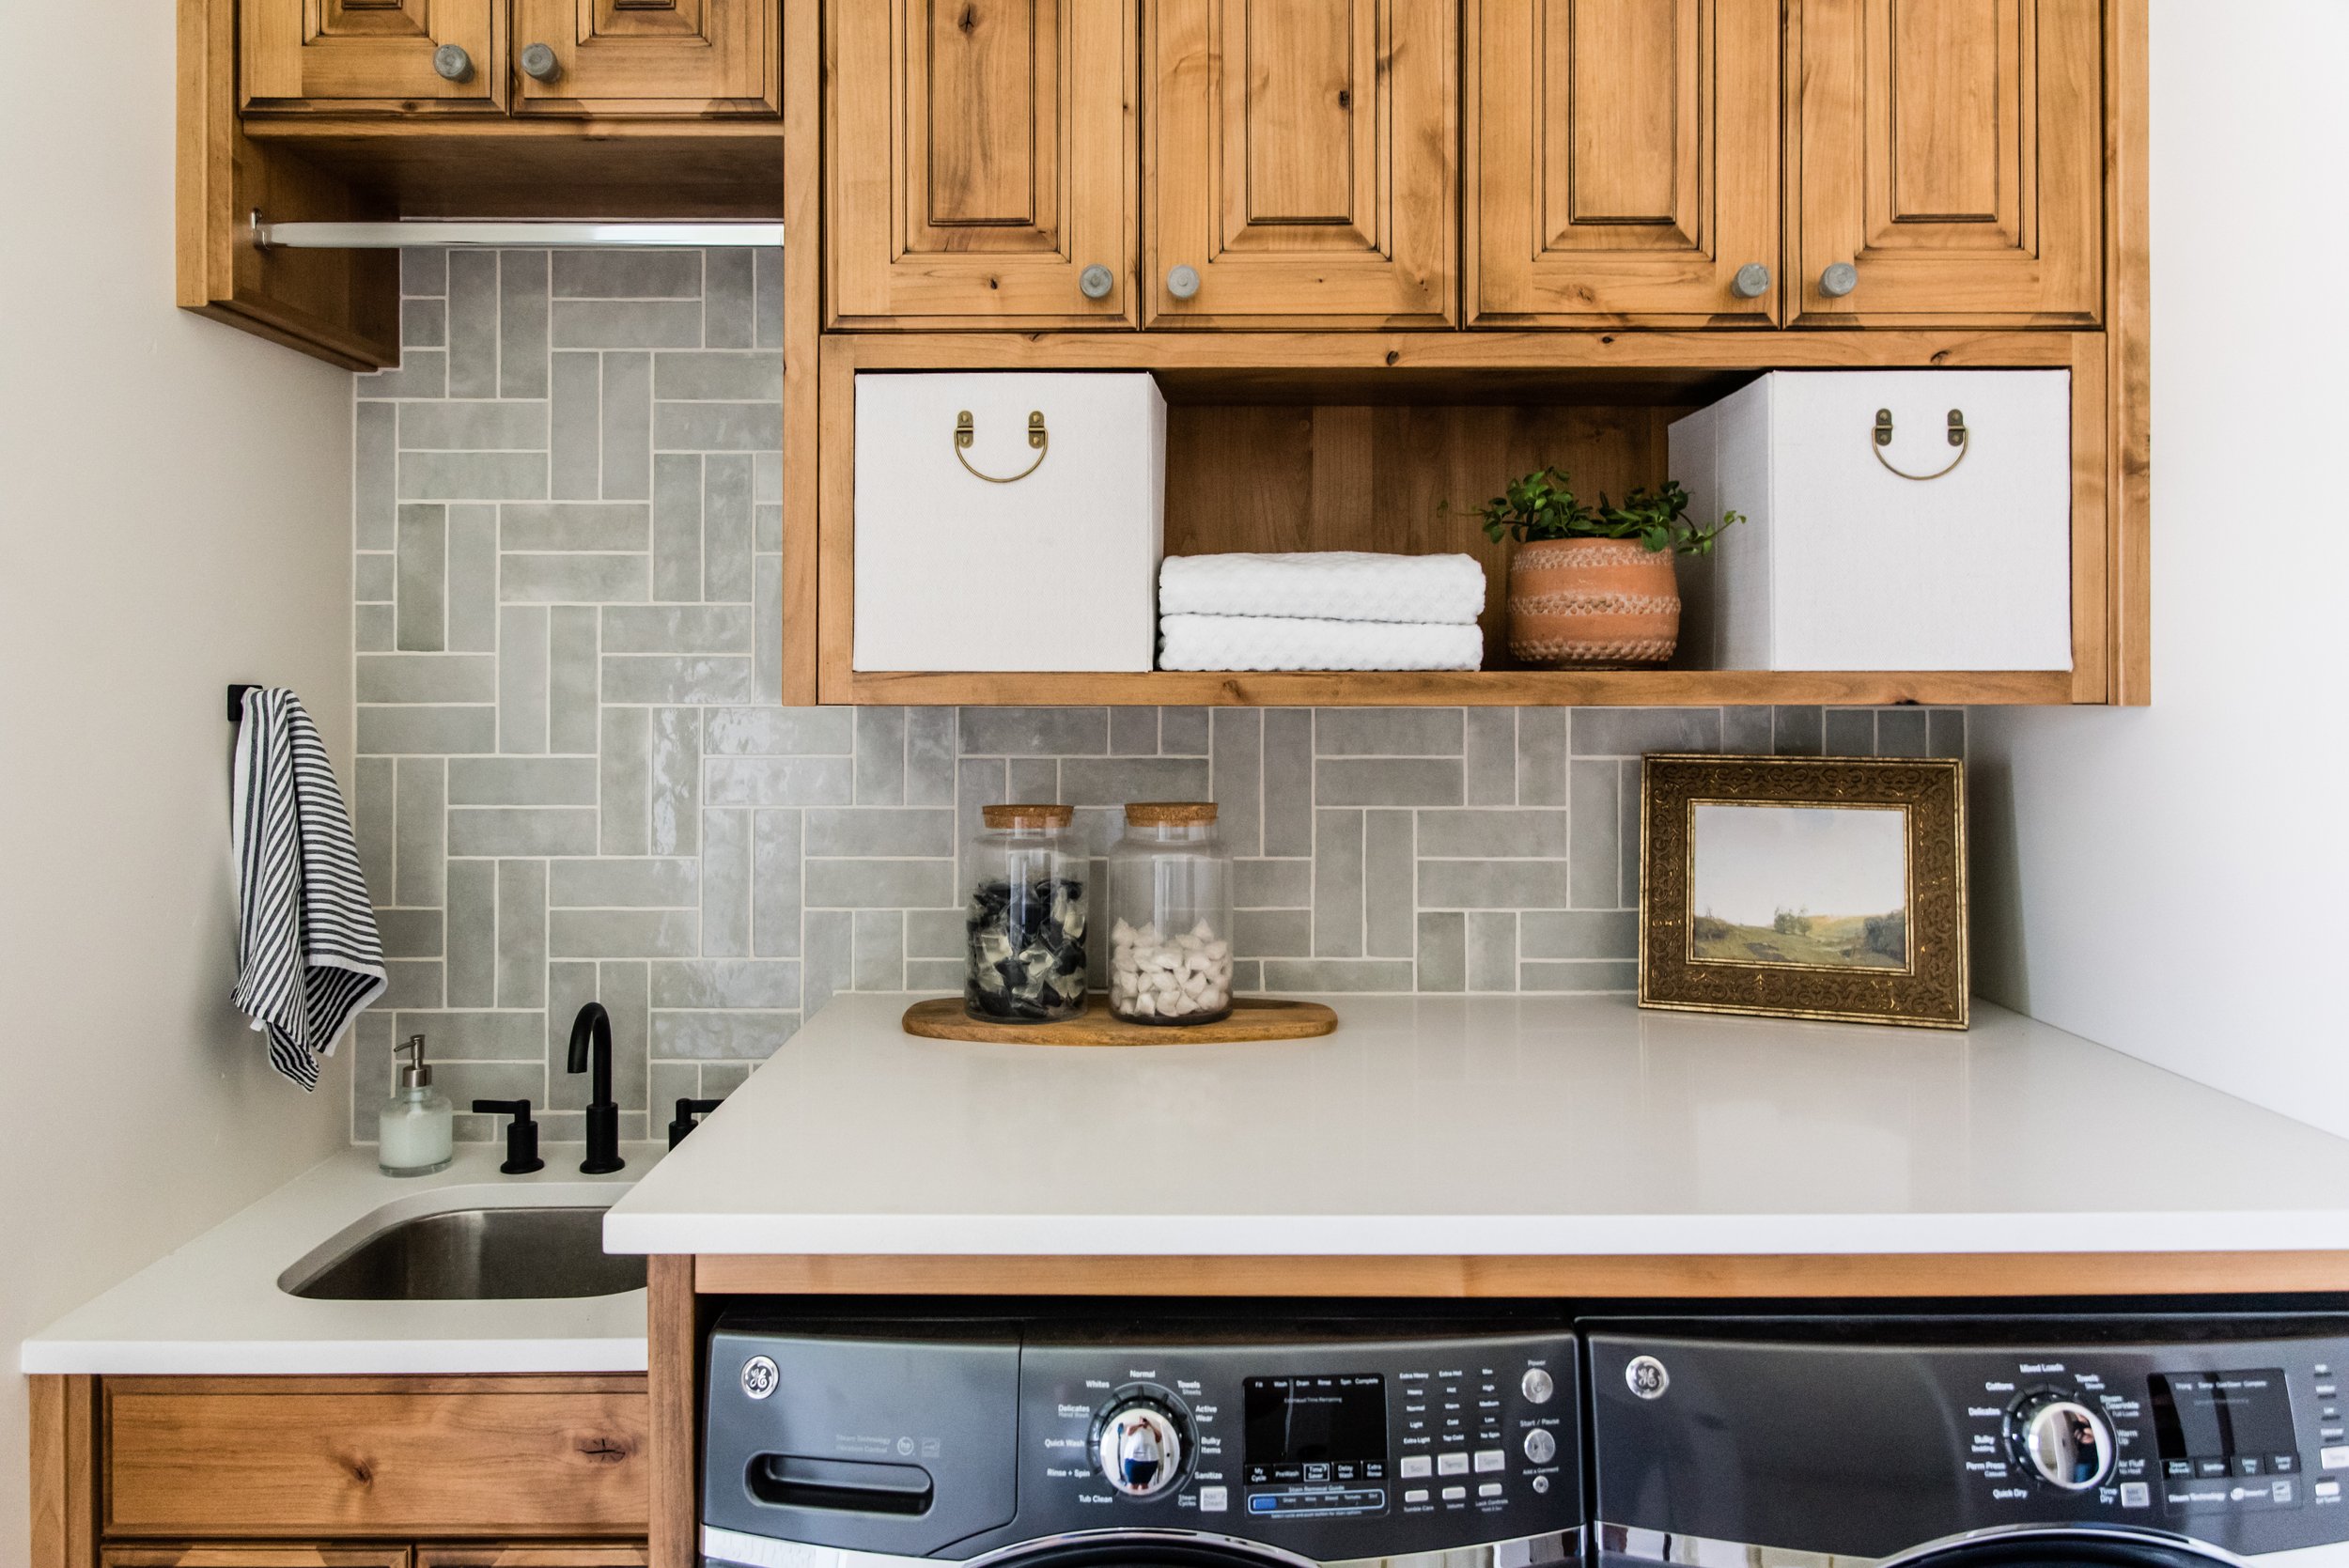  An interior designer in Cache Valley Utah goes through the pros and cons of different tiles and where to put them in your home. tile pros and cons choose what kind of tile #LizPowellDesign #InteriorDesignUtah #InteriorDesigner #buildingahome #tile #